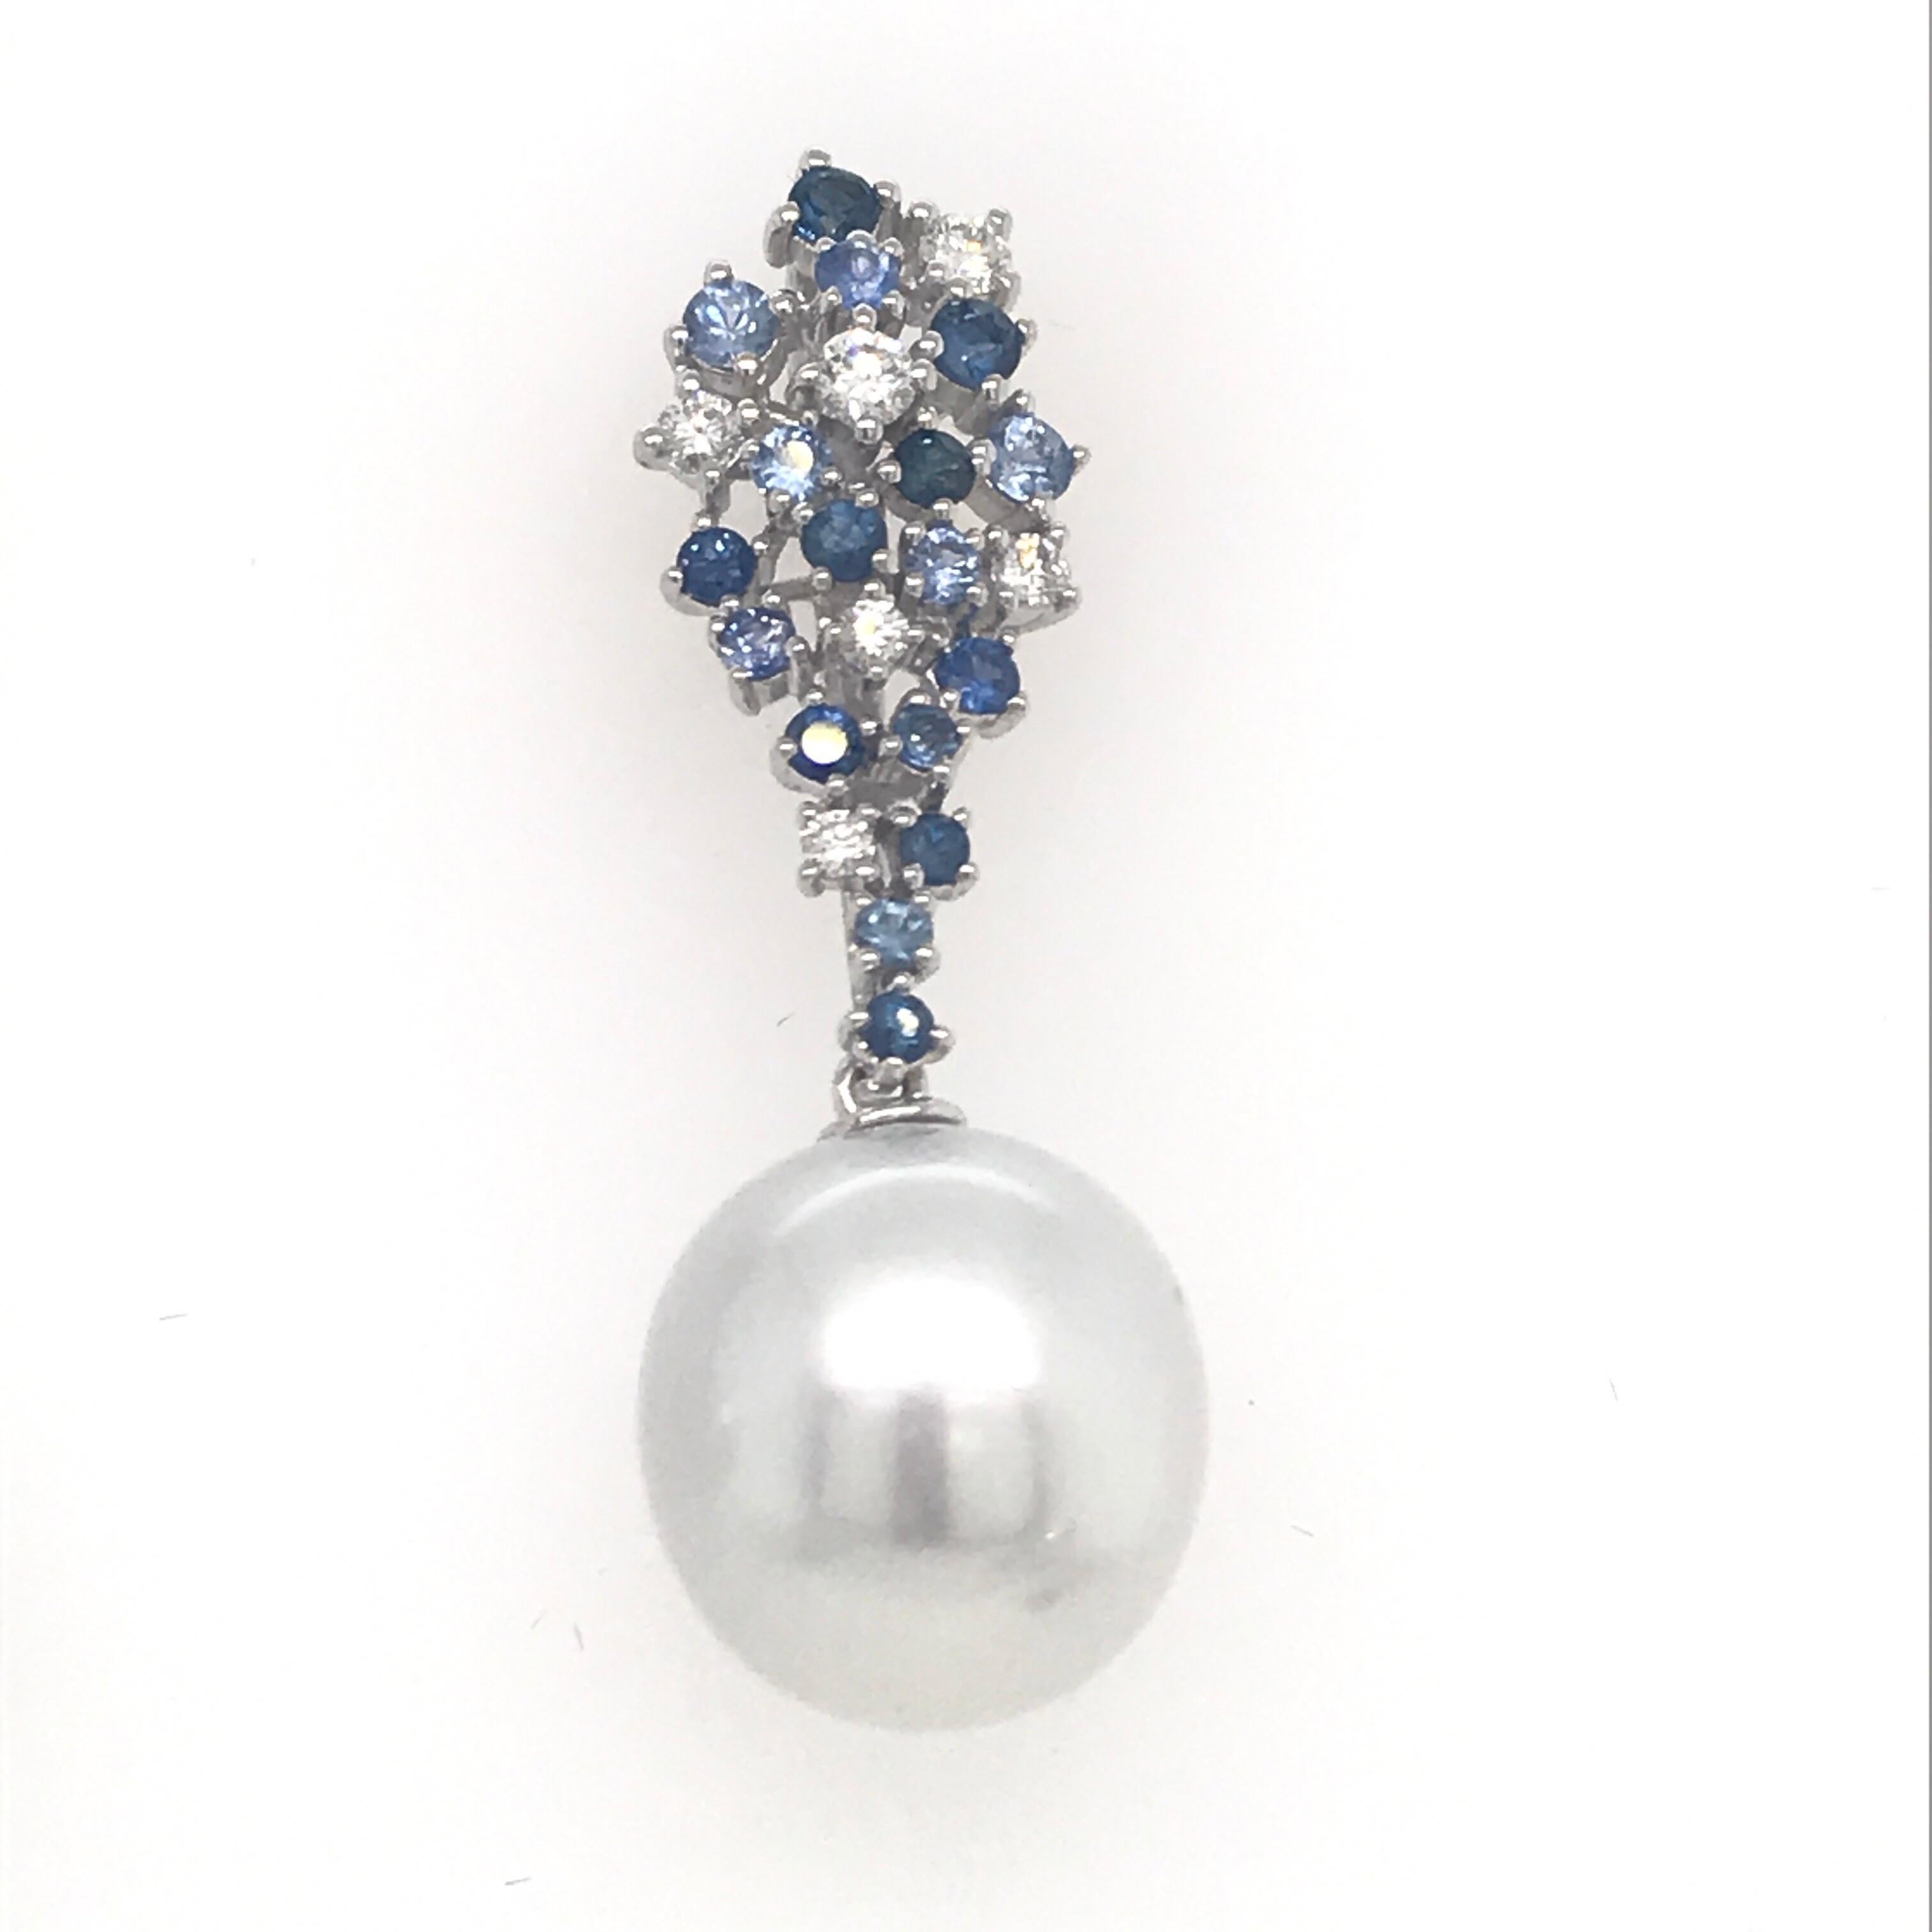 18K White gold drop earrings featuring a cluster of 34 blue sapphires weighing 1.16 carats and 12 diamonds weighing 0.34 carats with two South Sea Pearls measuring 12-13 mm. 